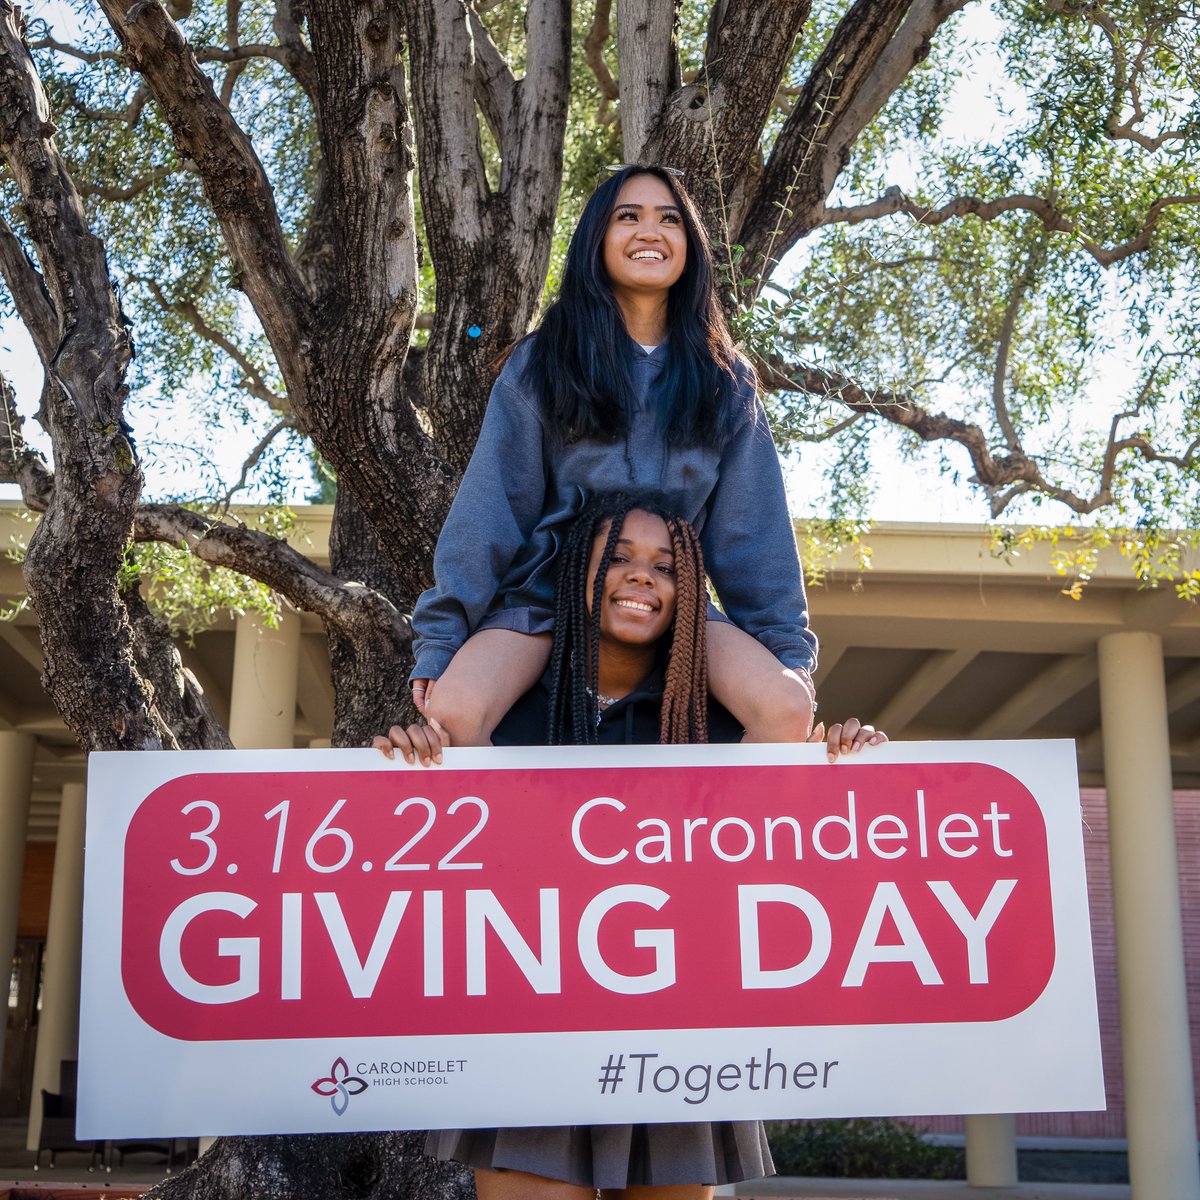 We're one week away from Carondelet Giving Day on March 16! We can: 💗 Share our sisterhood 🚪 Provide opportunity 🔥 Inspire greatness 💪 Empower young women to reach their potential There's nothing we can't accomplish #Together!